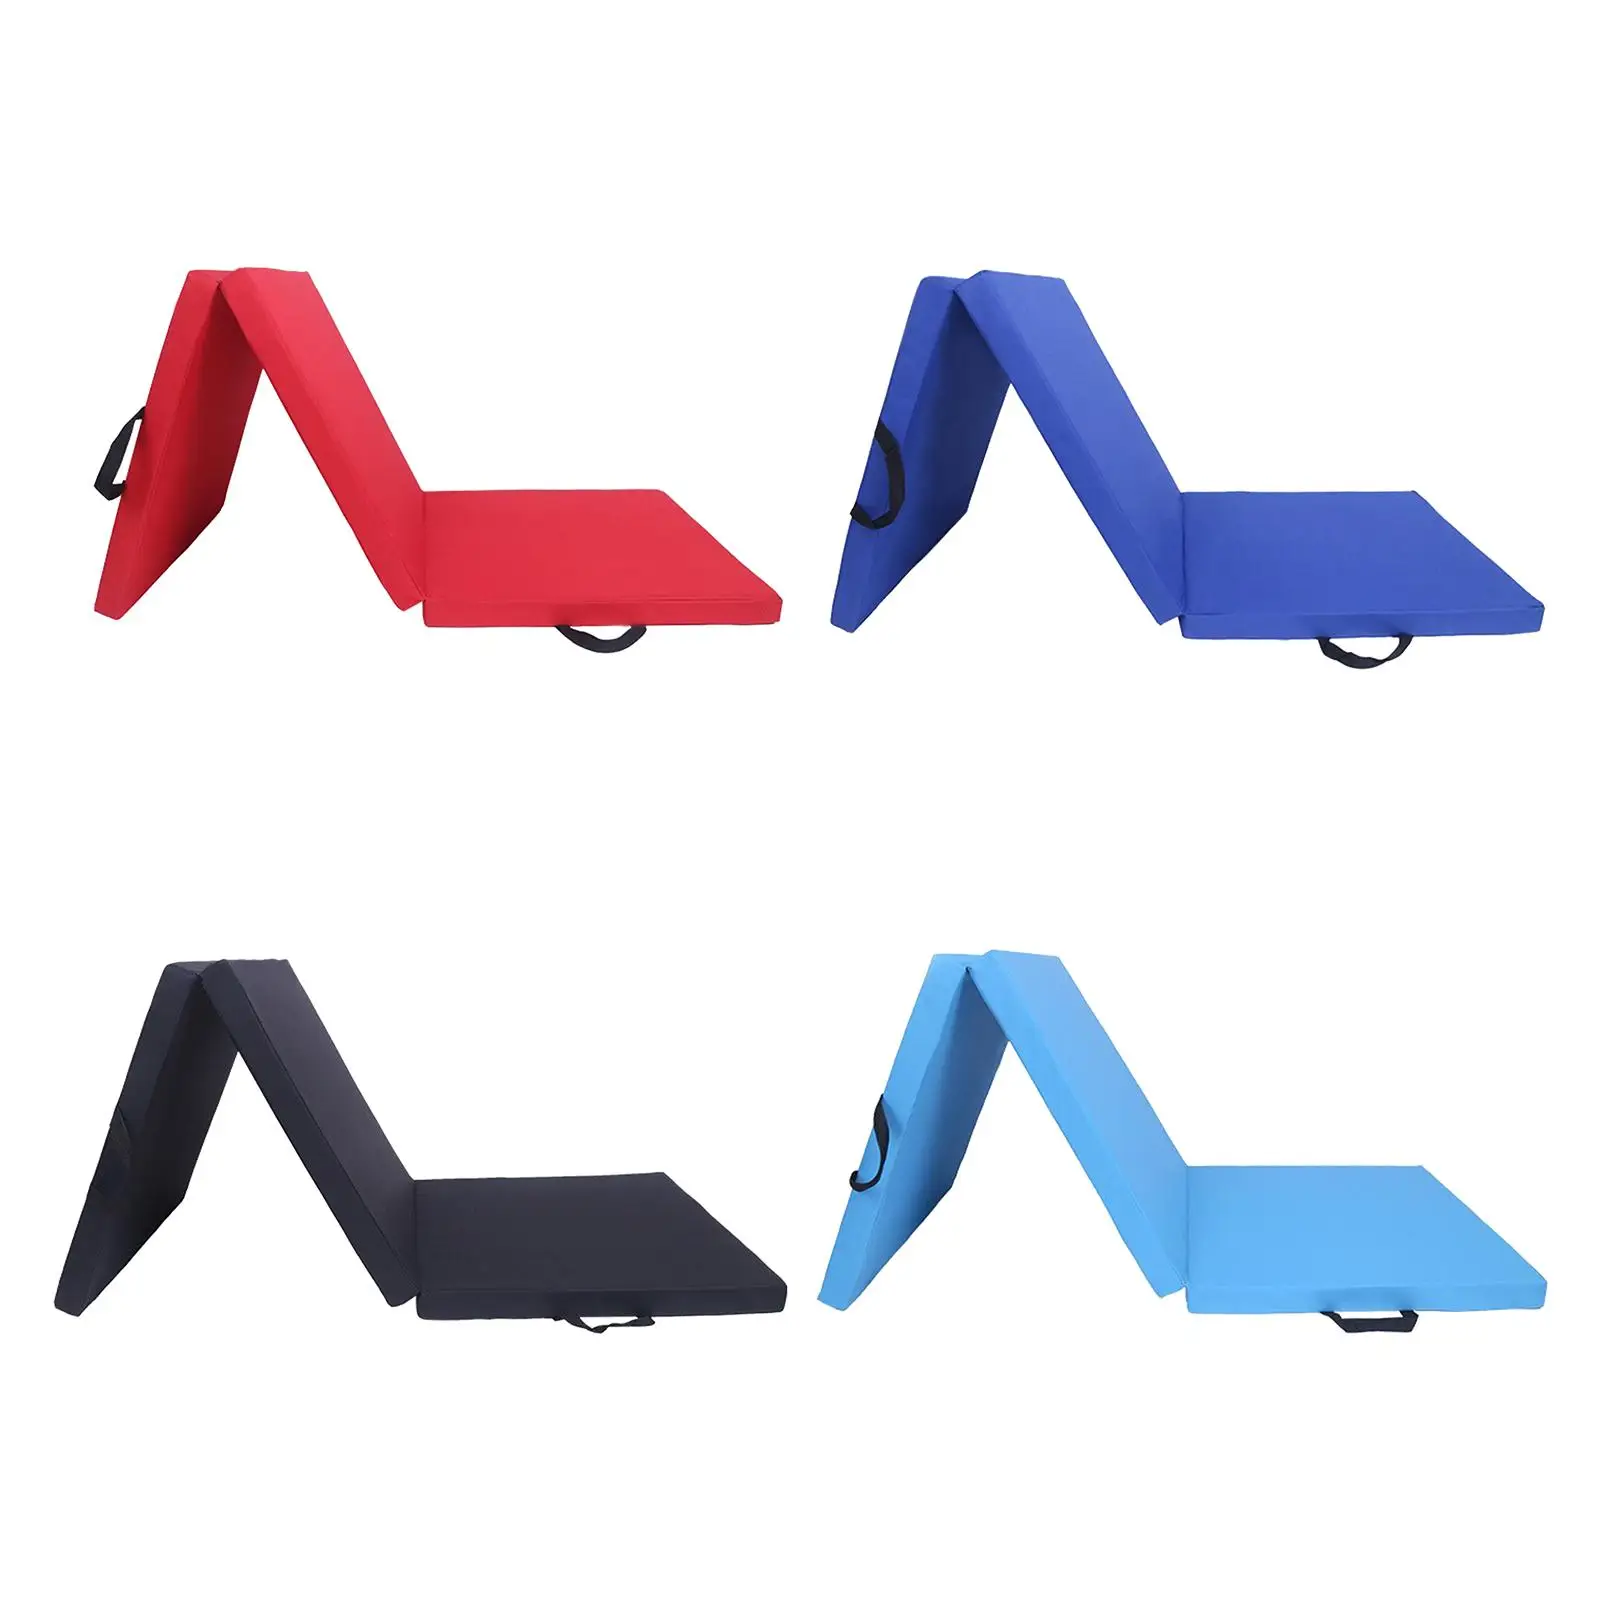 

Three Fold Folding Exercise Mat Floor Protection Unisex Waterproof Carrying Handle for Yoga Training Stretching Pilates Tumbling